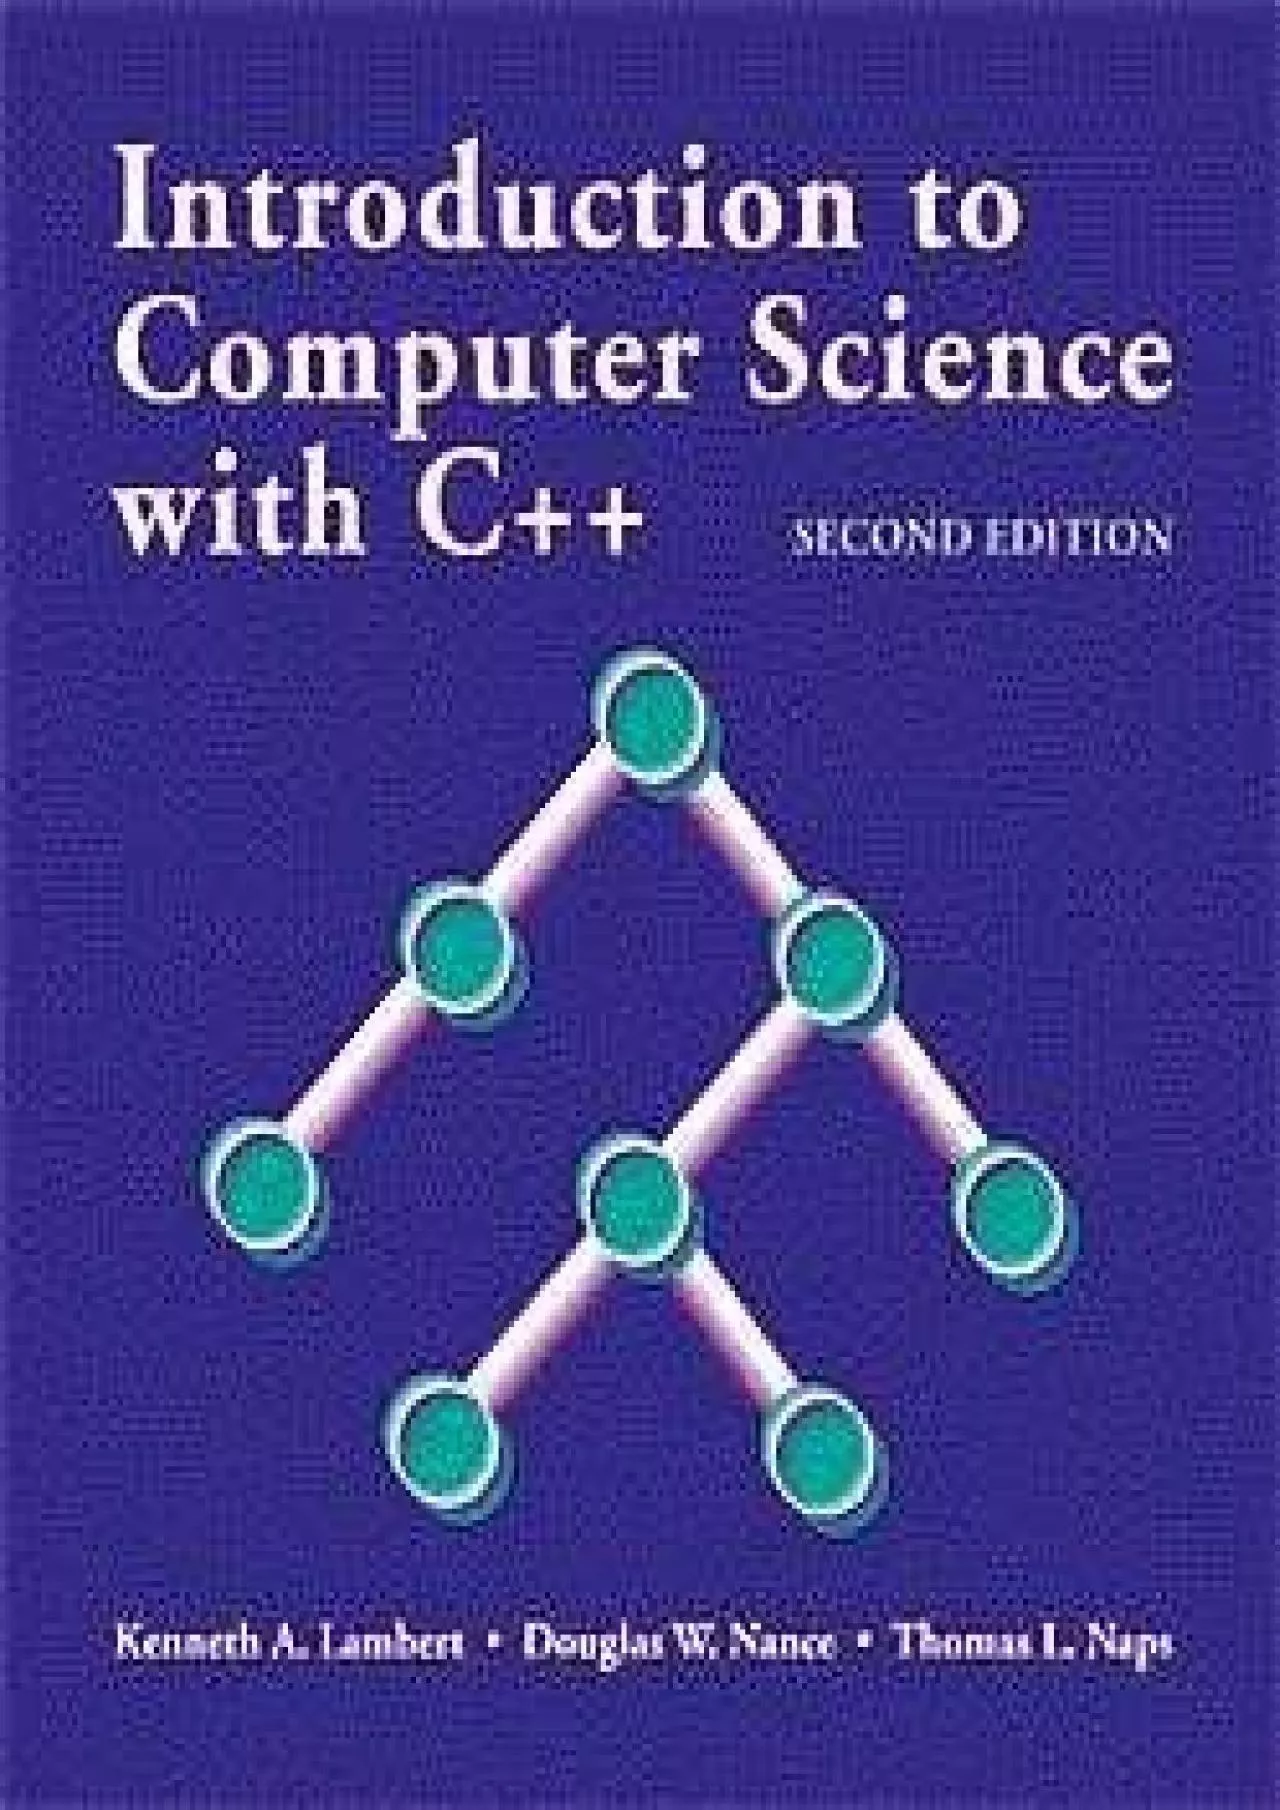 [FREE]-Introduction to Computer Science with C++